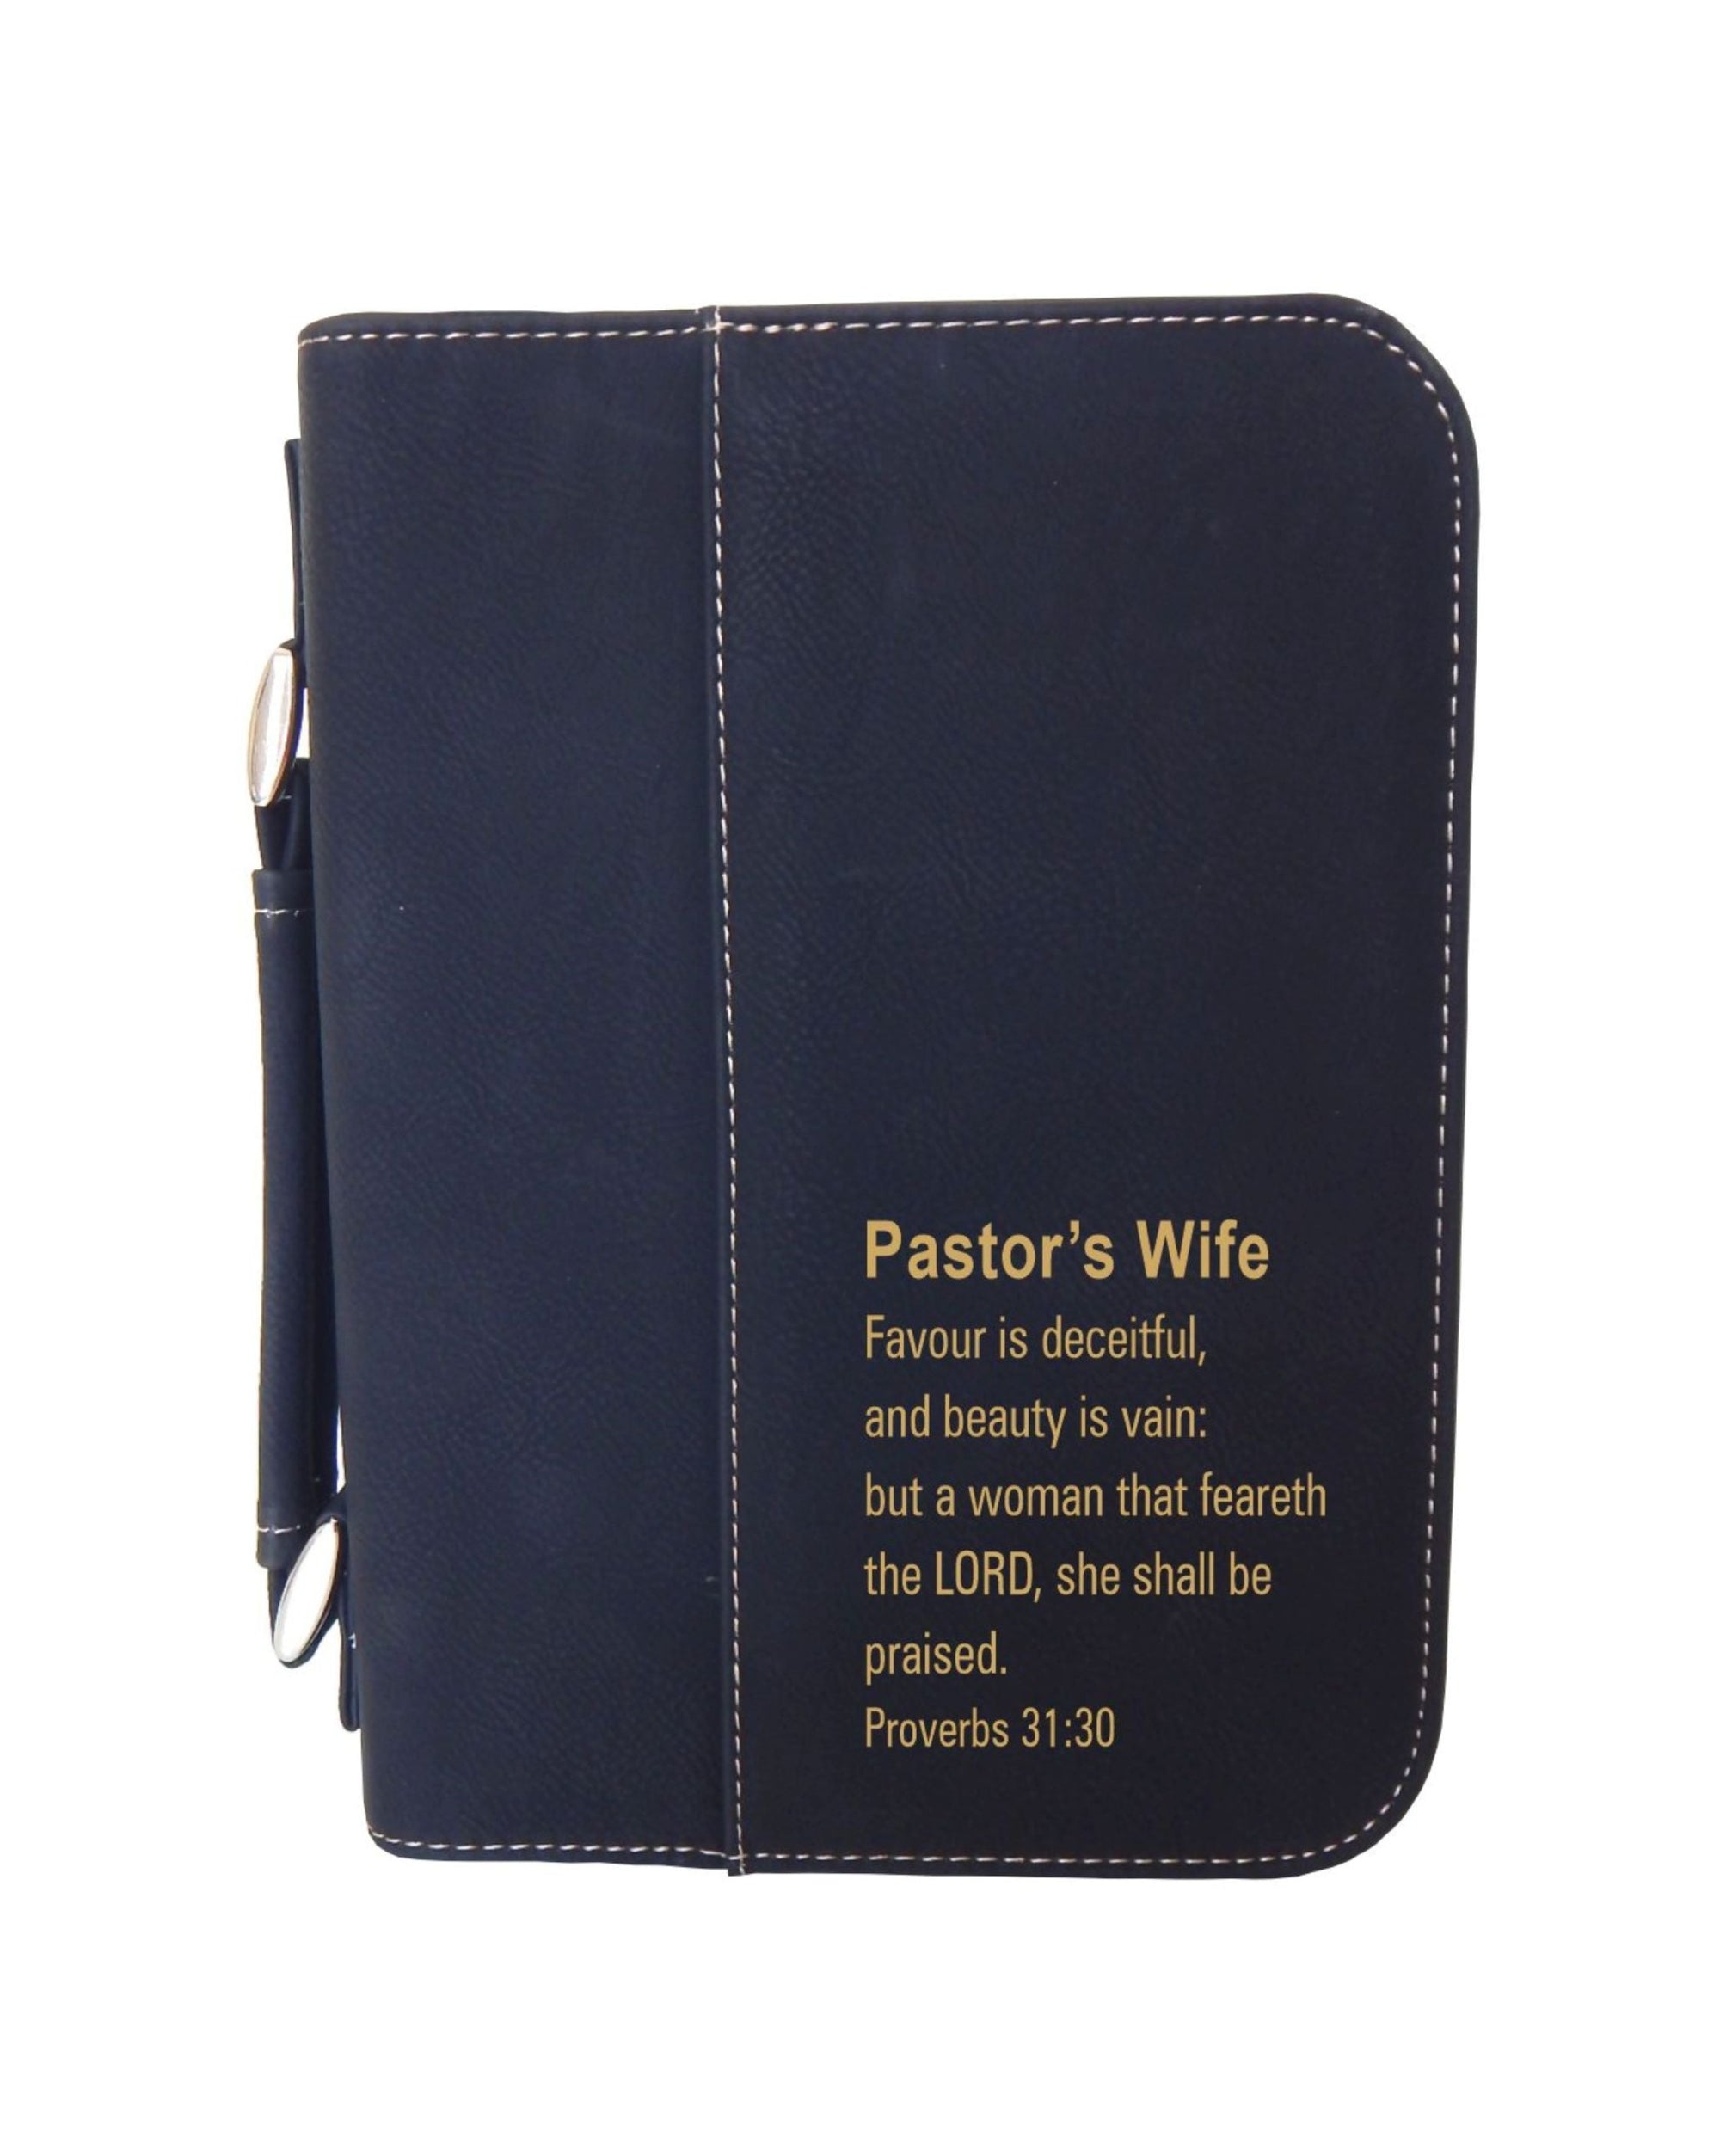 Pastor Gift | Religious Gift for Pastor's Wife | Personalized Bible Cover BCL045